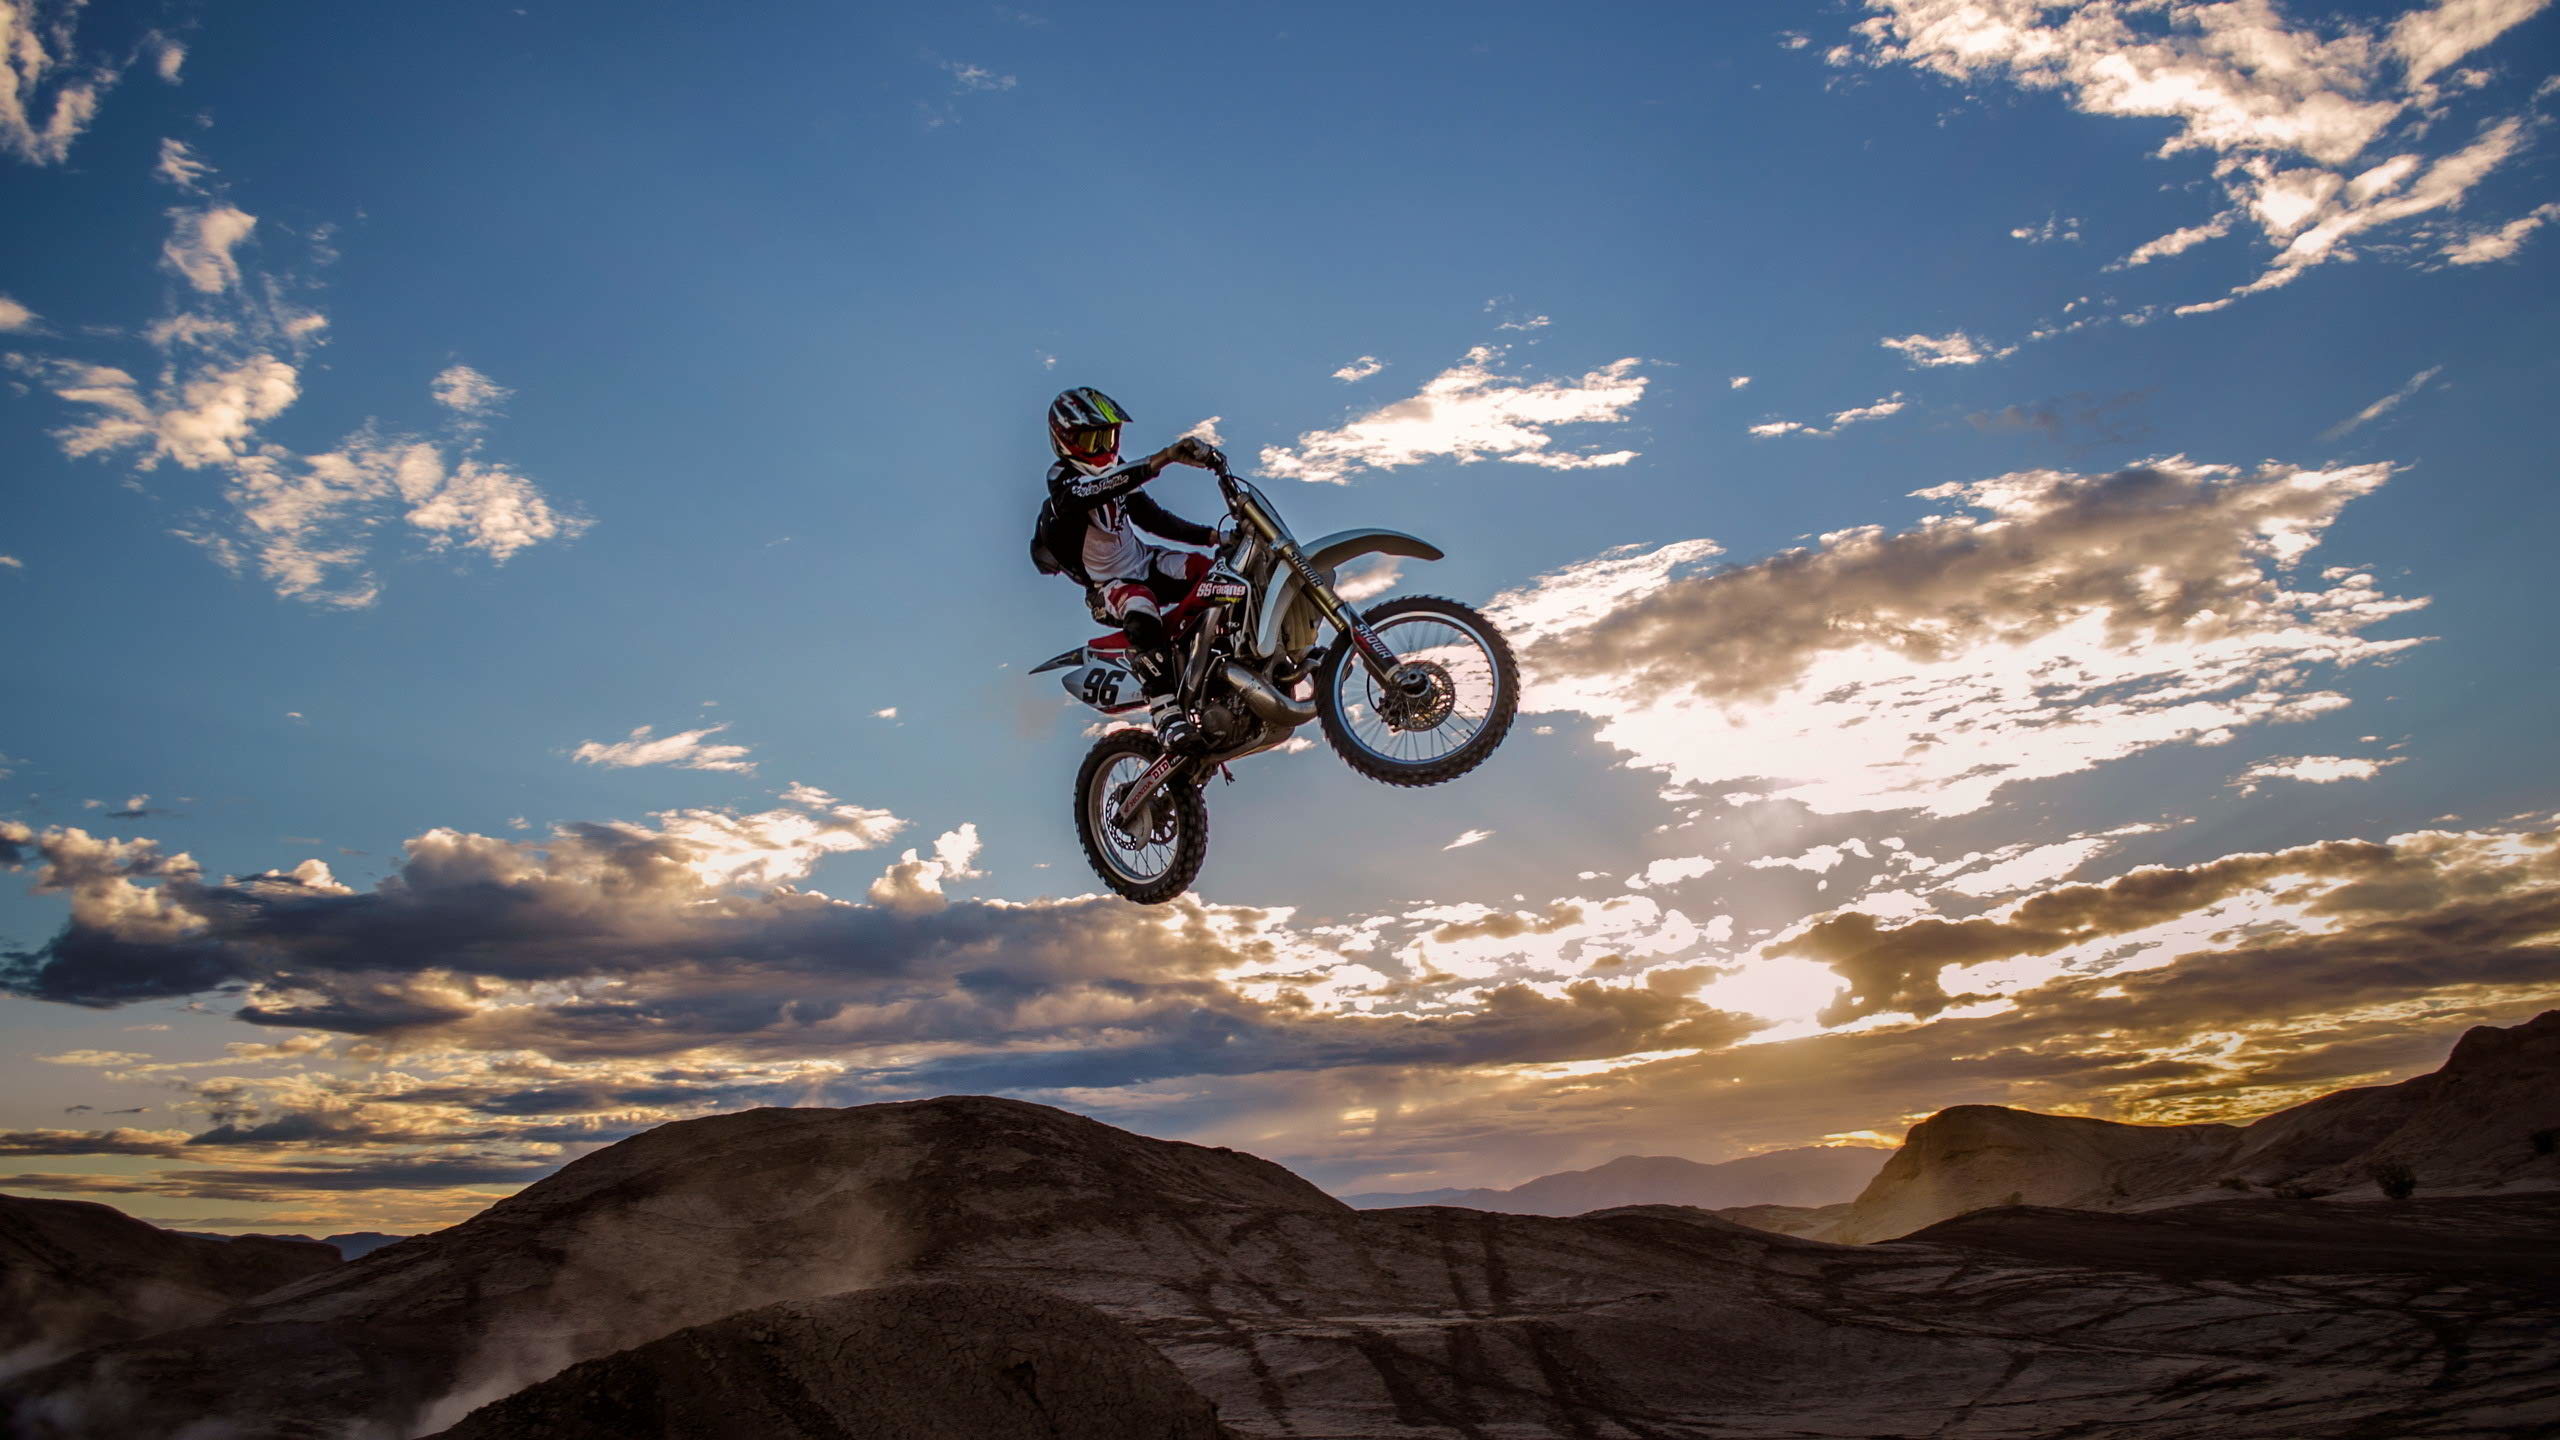 2560x1440 awesome motocross wallpapers hd